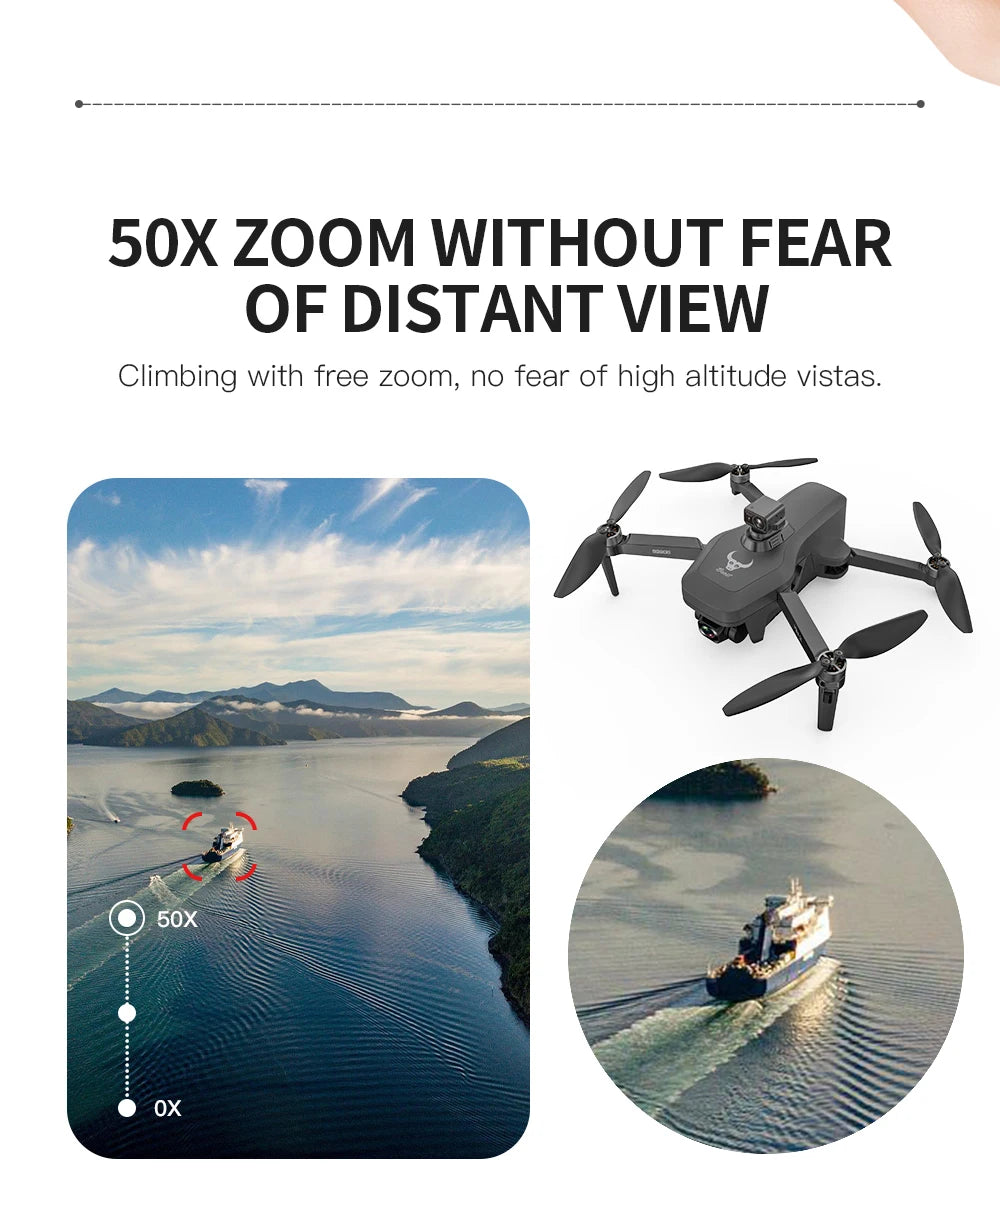 ZLL SG906 MINI SE Drone, 50X OXYZOOM WITHOUT FEAR OF DISTANT VIEW C